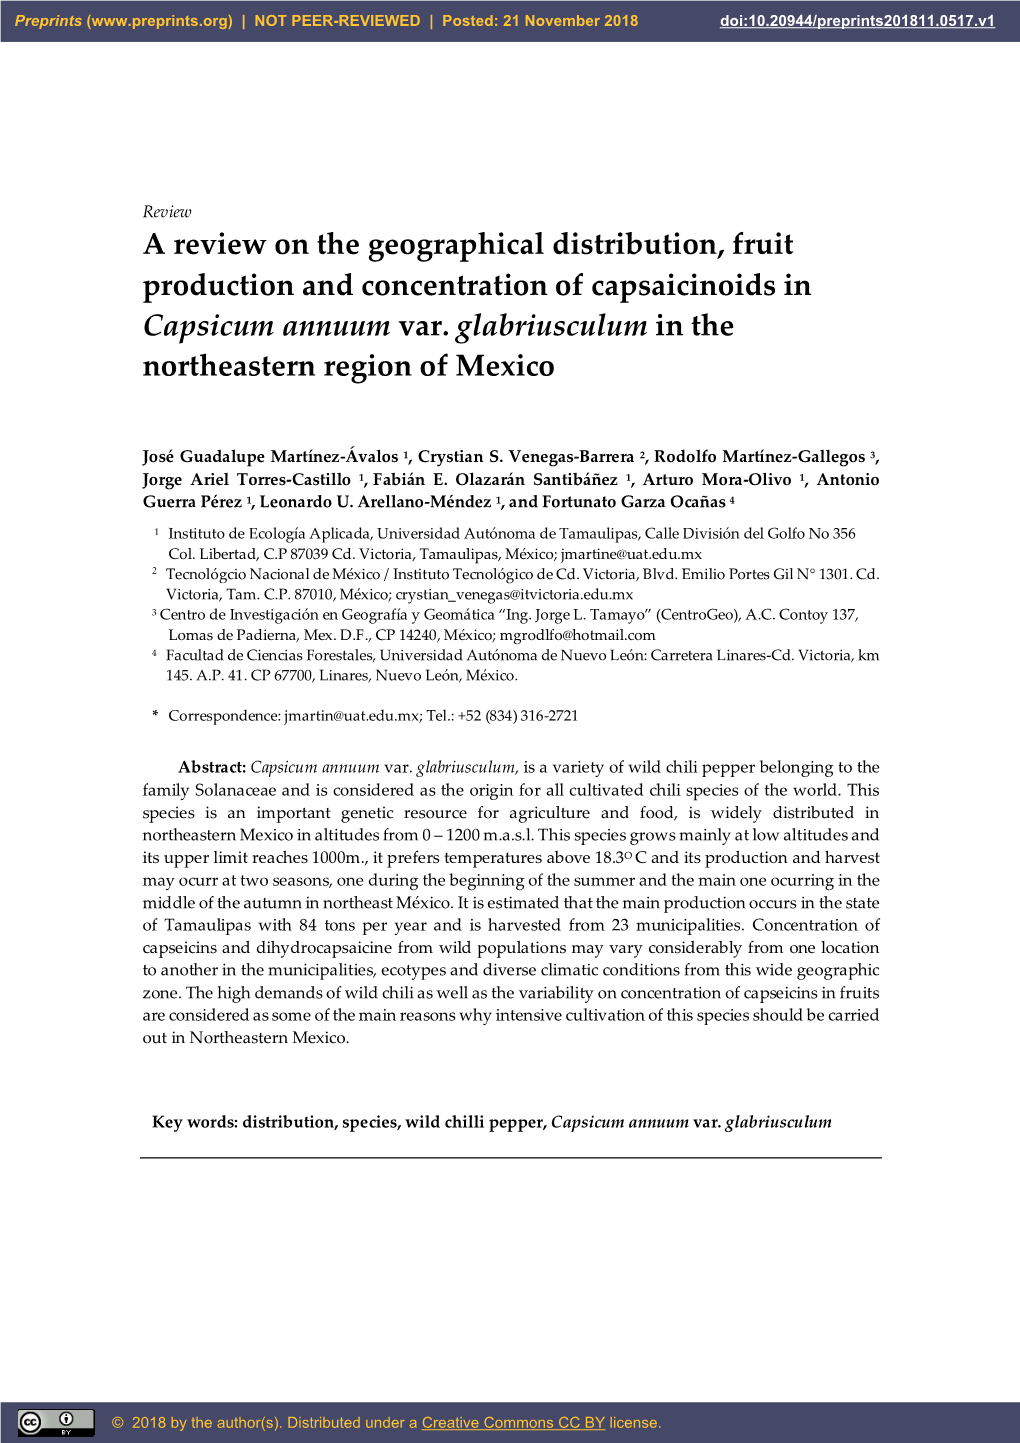 A Review on the Geographical Distribution, Fruit Production and Concentration of Capsaicinoids in Capsicum Annuum Var